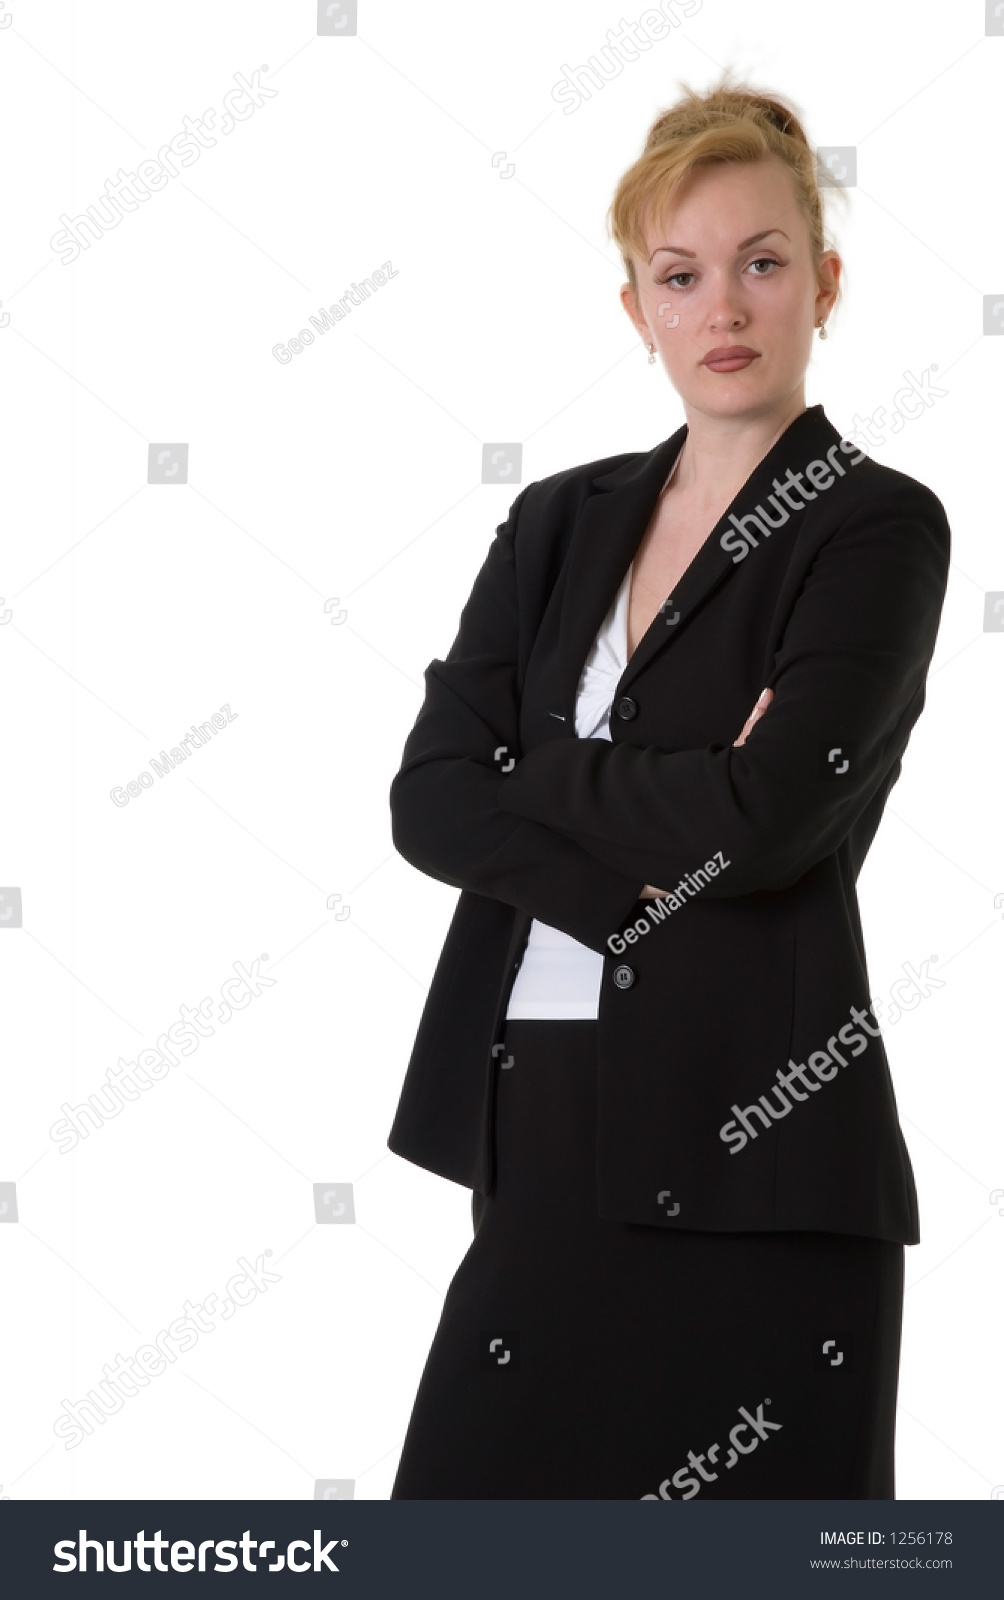 Professional Confident Business Woman Arms Crossed Stock Photo 1256178 ...